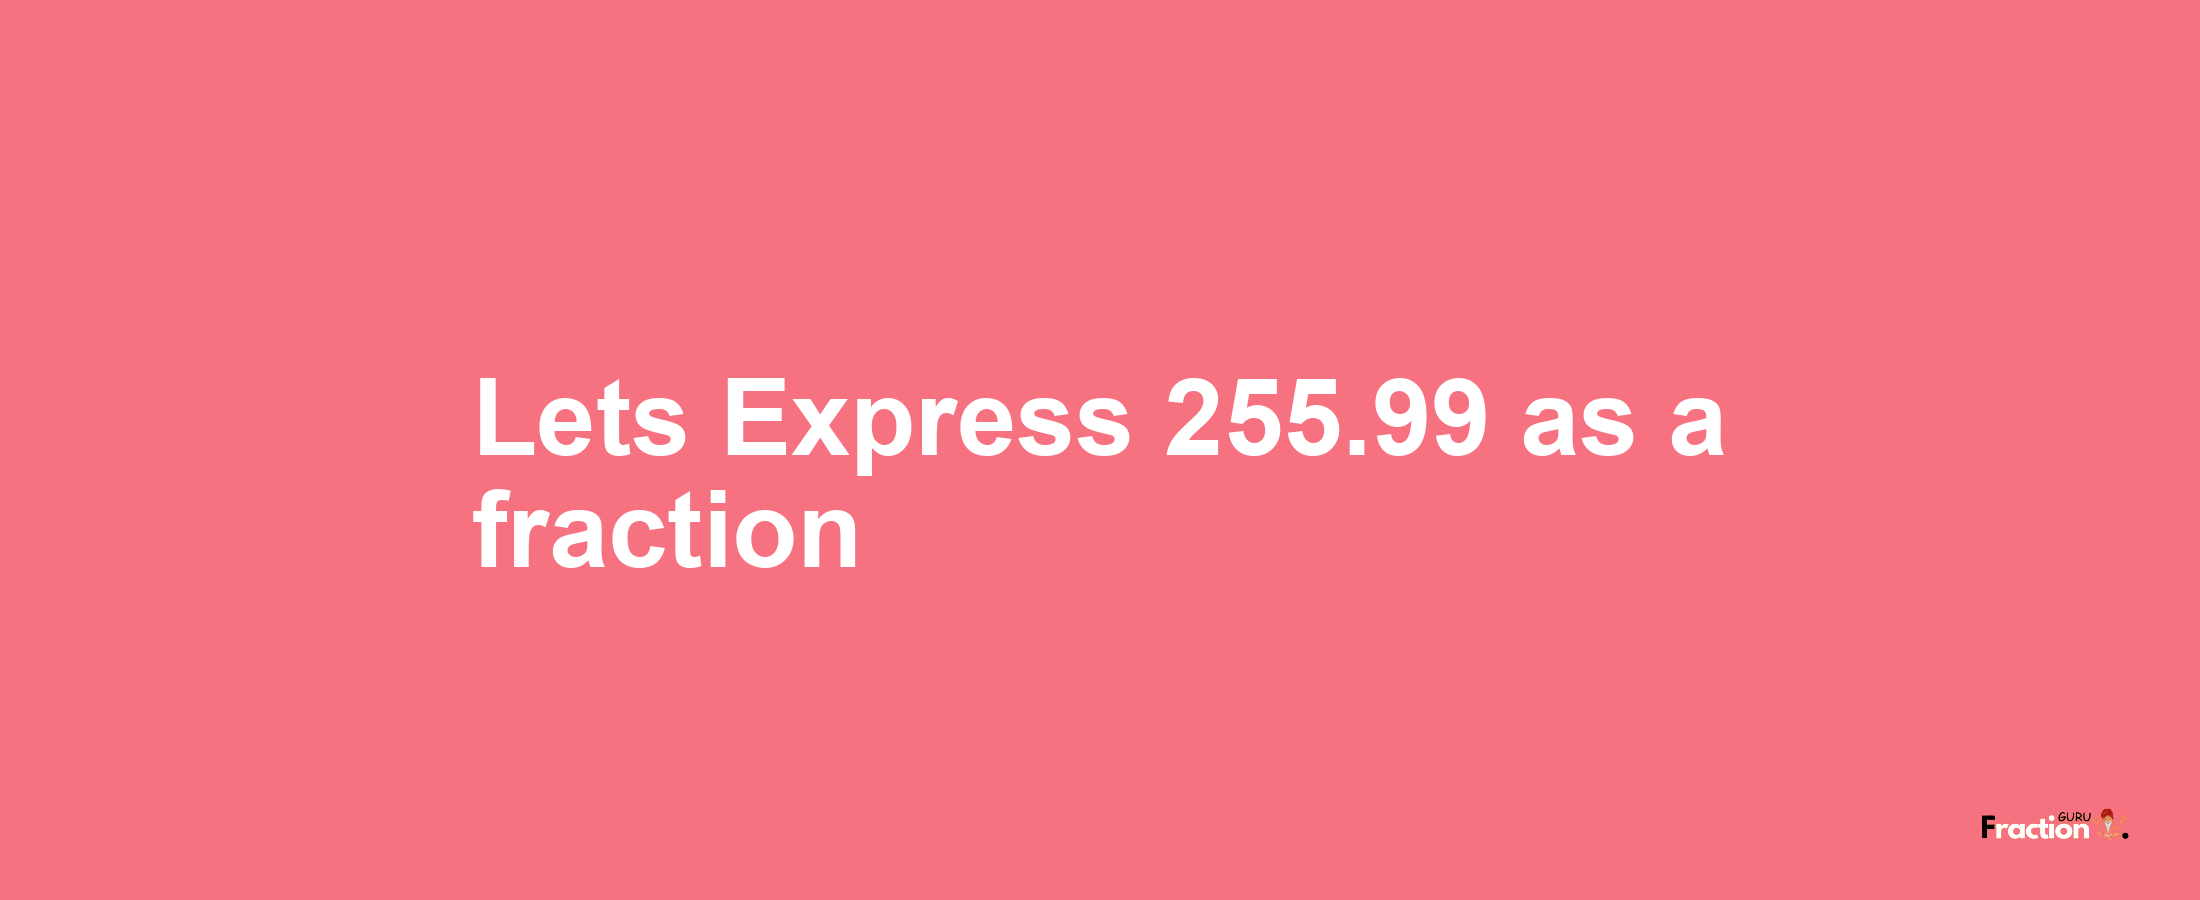 Lets Express 255.99 as afraction